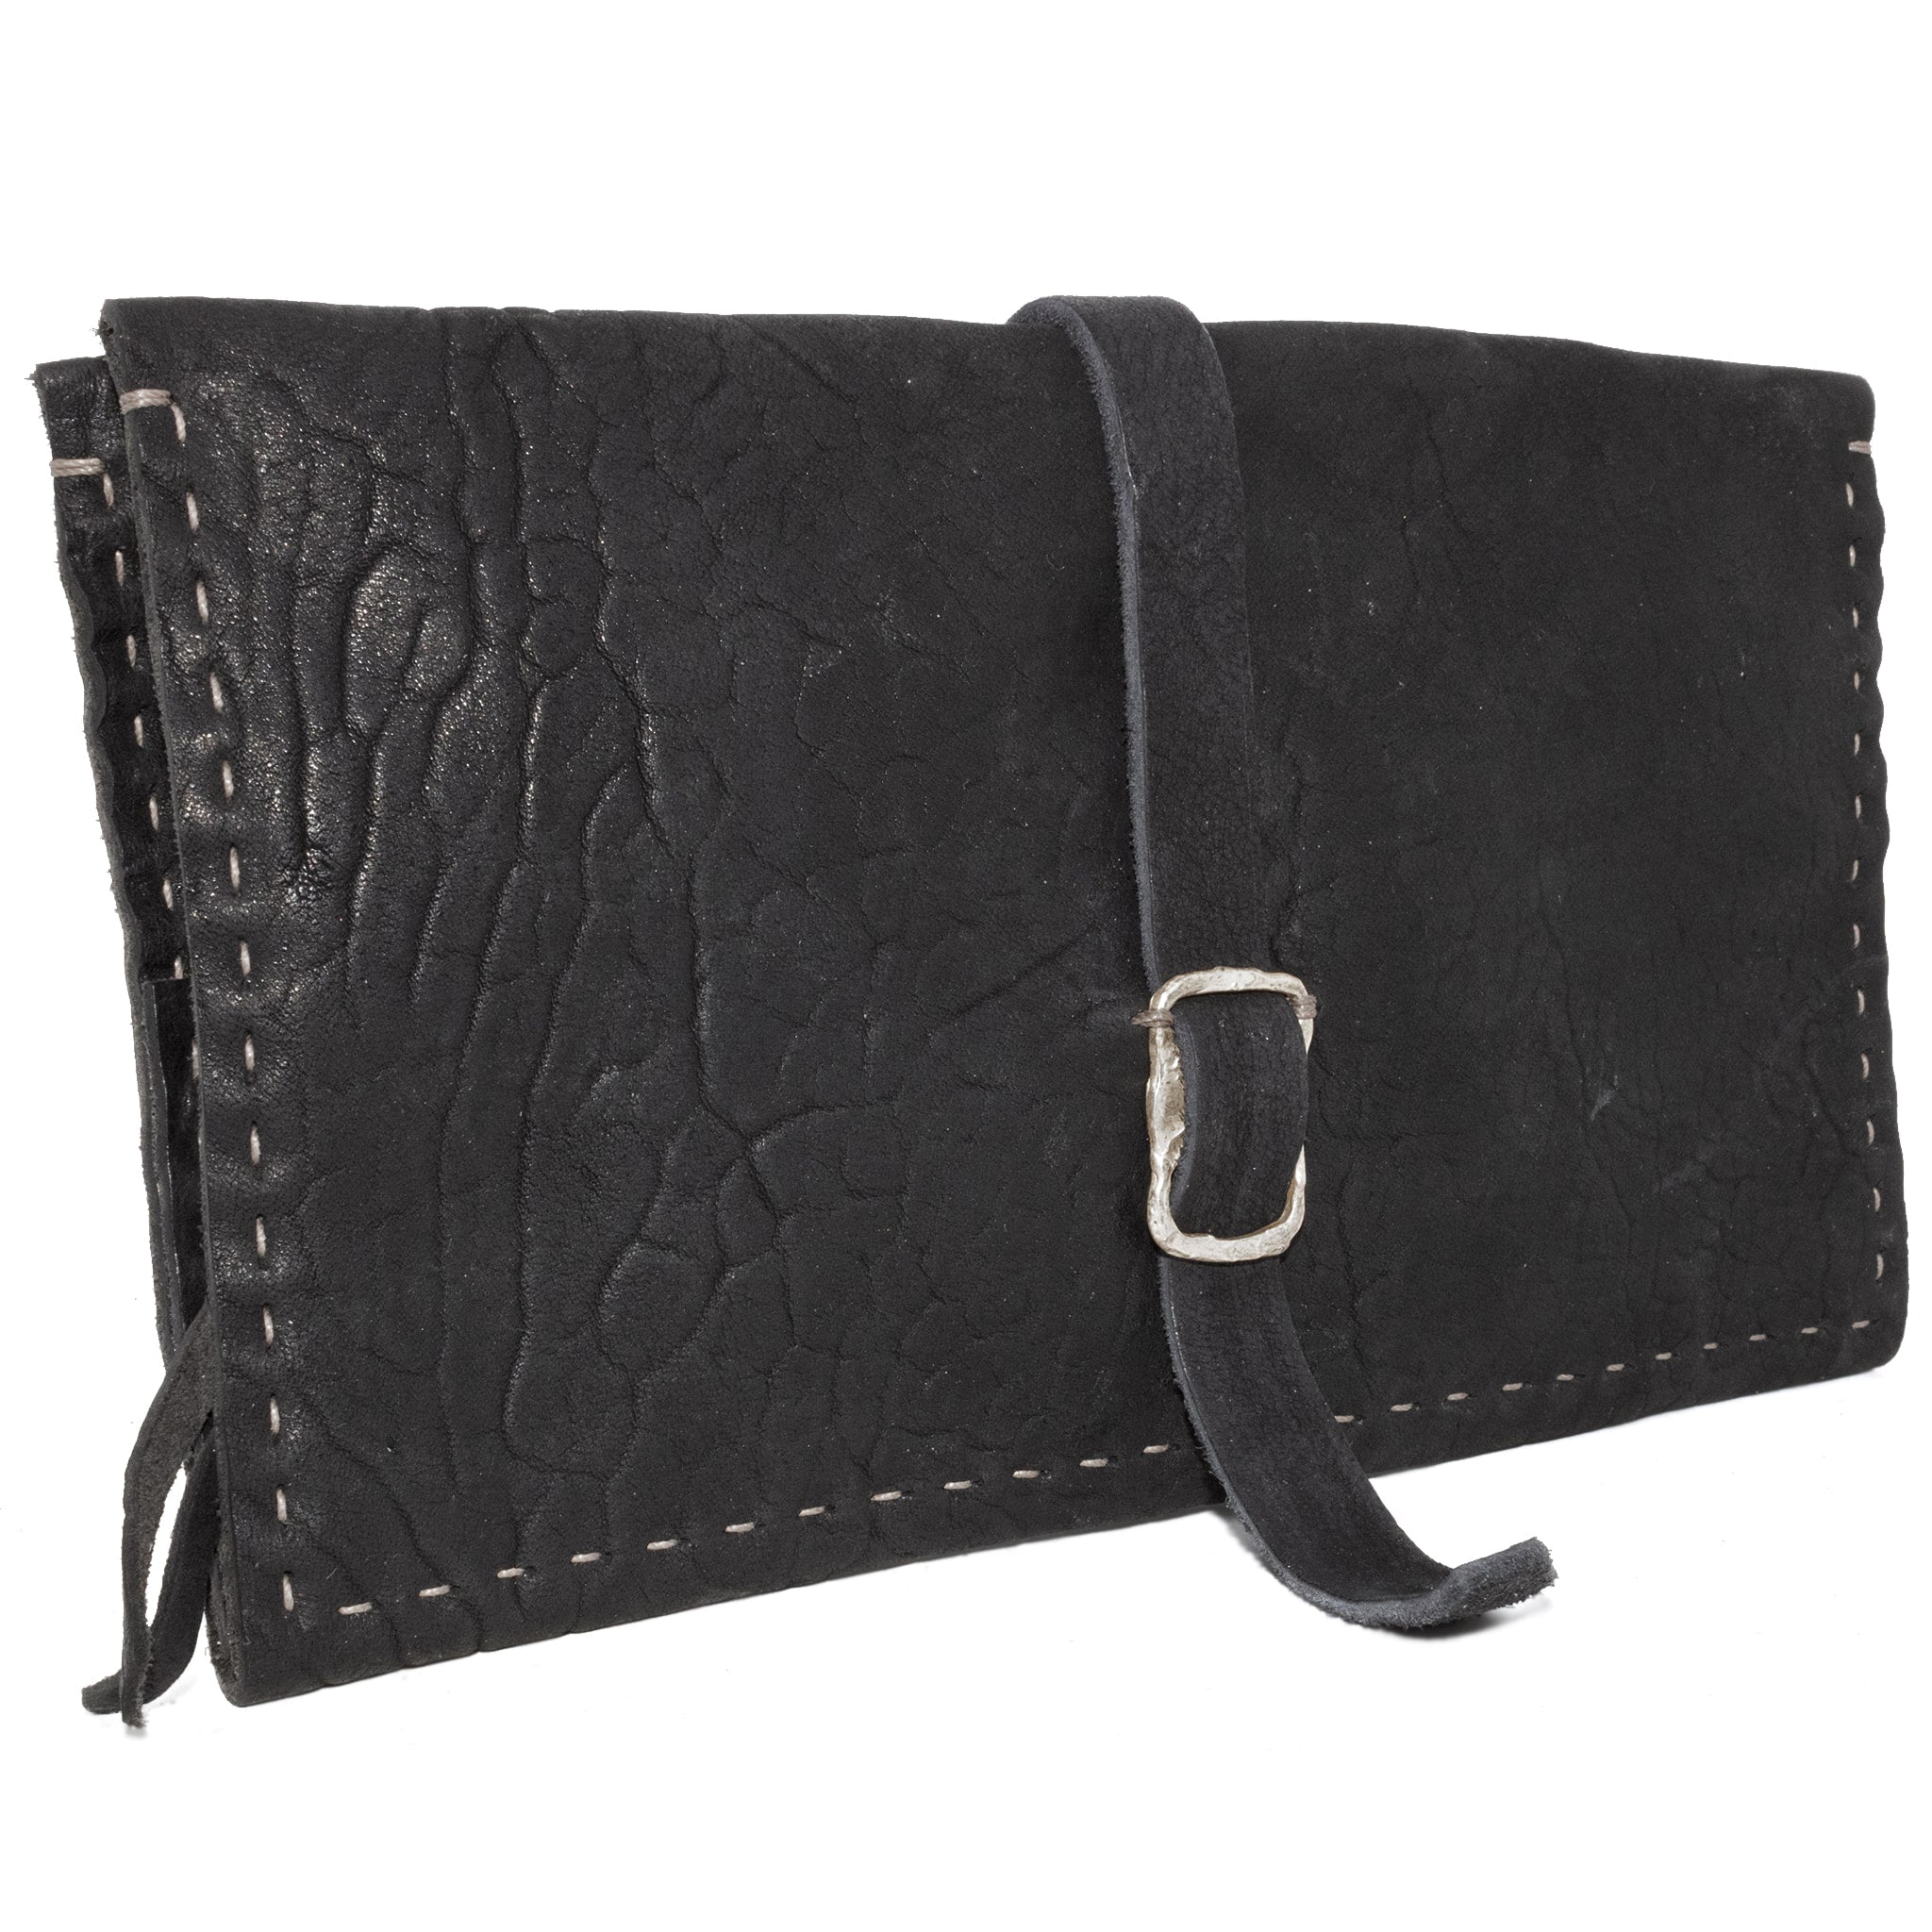 black culatta leather wallet available from atelier skn